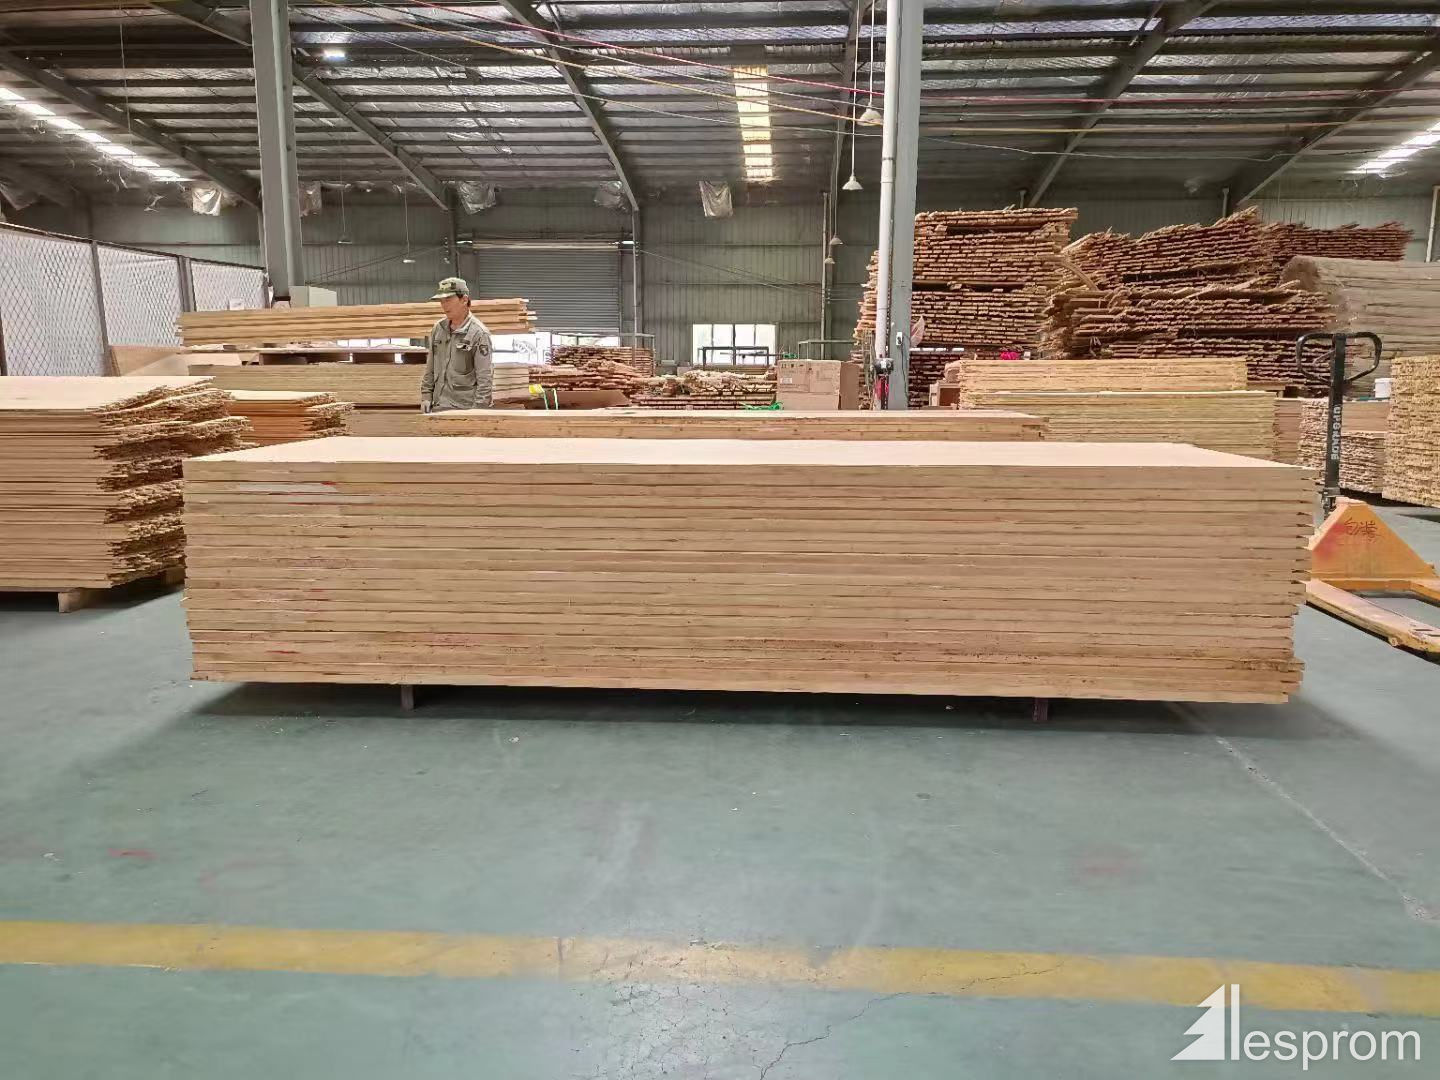 20 mm x 1220 mm x 2440 mm AD S2S Pressure Treated Bamboo Lumber